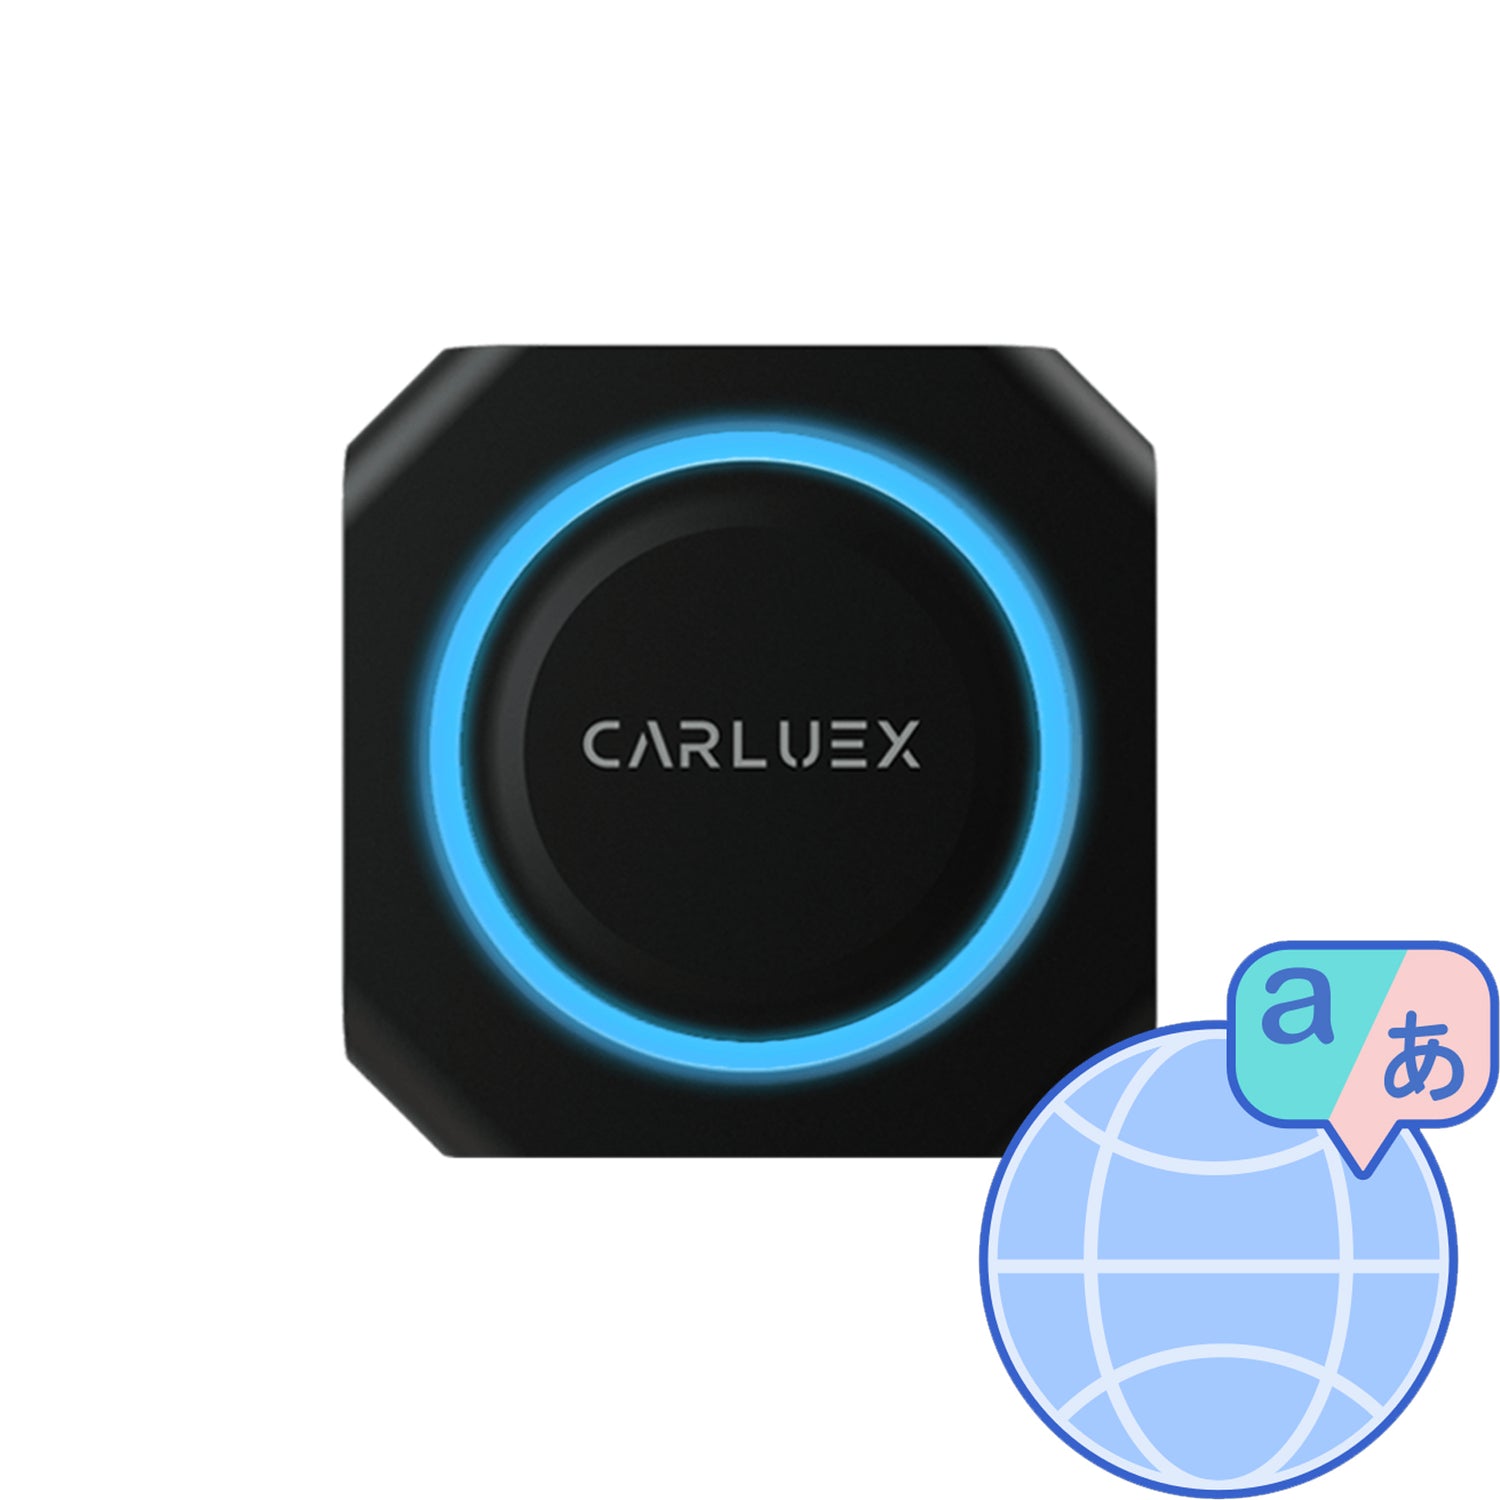 How Can I Set the Language on CARLUEX PRO+?